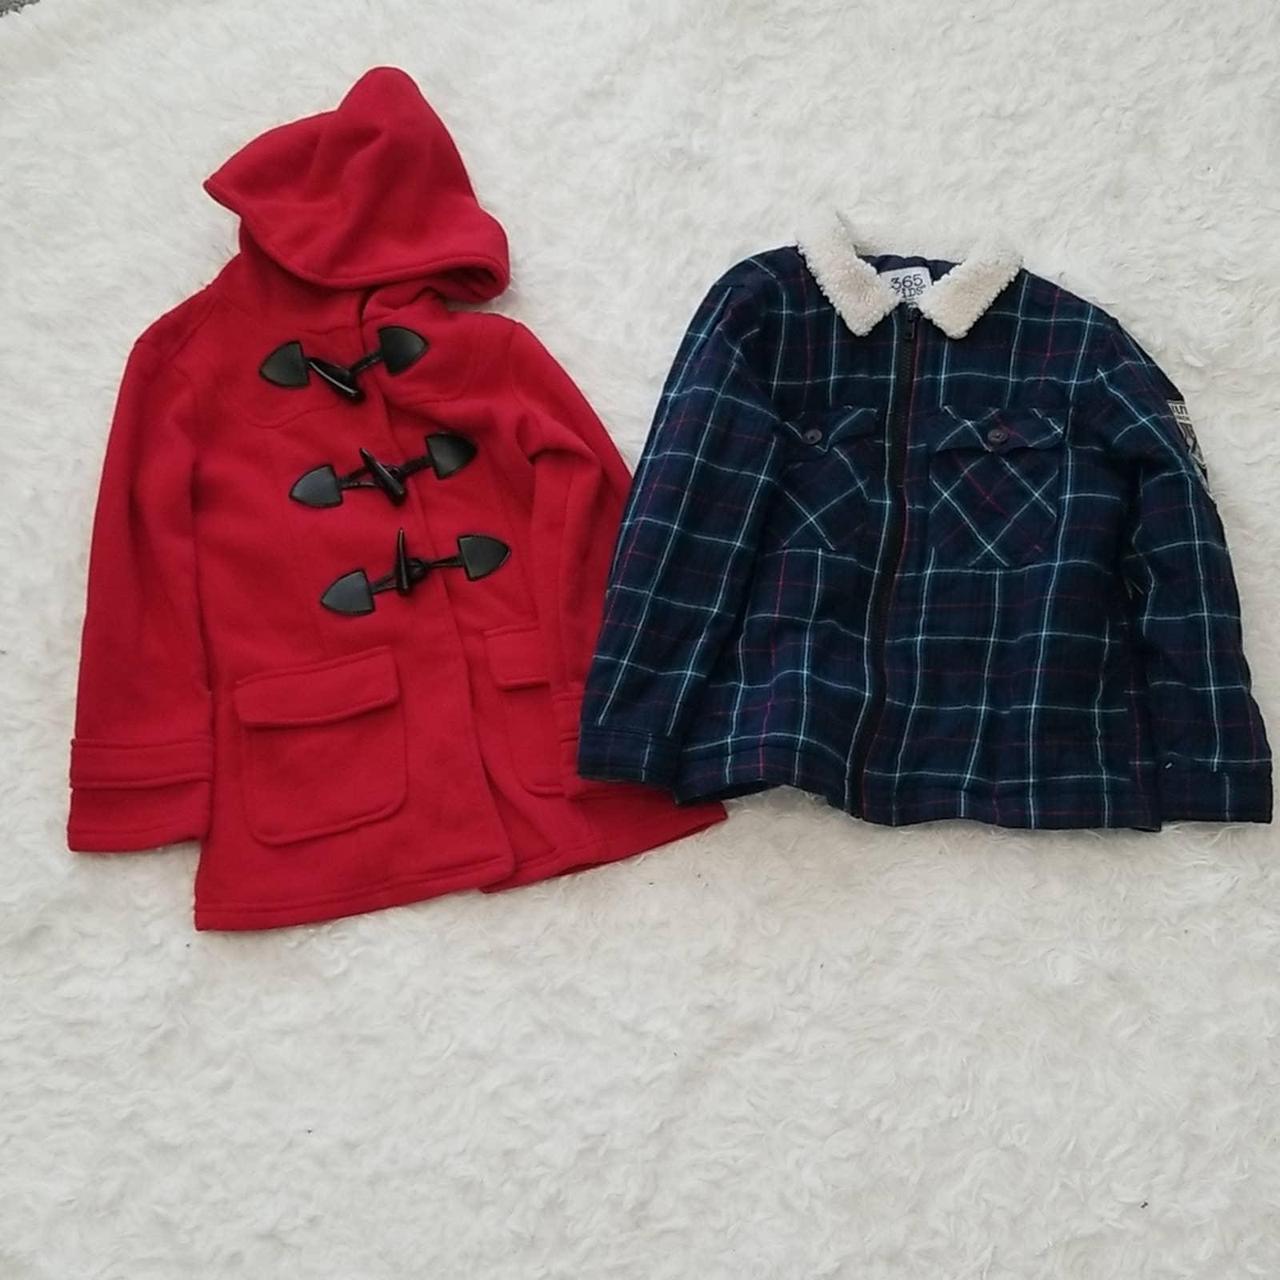 Product Image 1 - Preowned red Coat and Plaid